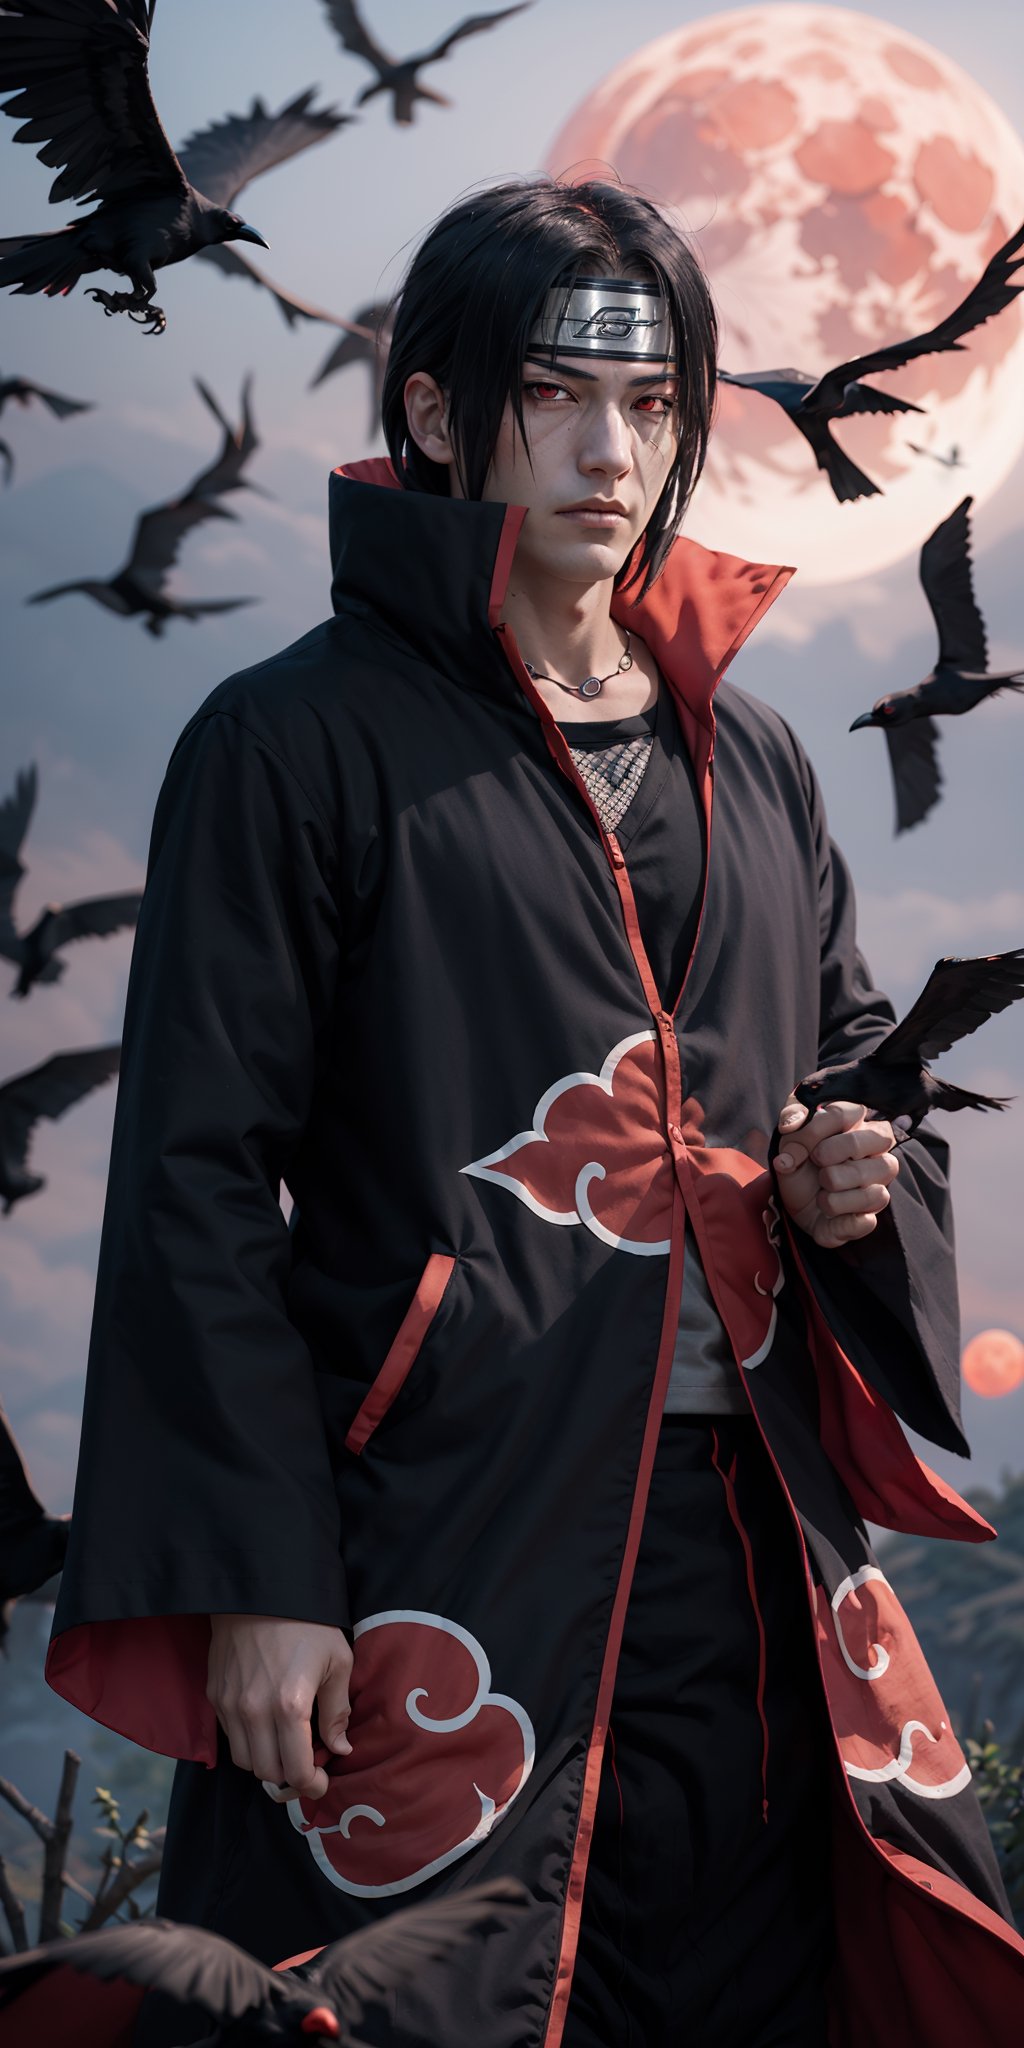 Imagine an extraordinary image featuring Itachi Uchiha, the iconic character from Naruto. Envision him in his Akatsuki outfit, with red eyes, long black hair, a strong physique, and a dynamic pose. Specify a background with a red moon, his ninja headband, and the perfect touch of crows flying. Request meticulous attention to detail in capturing Itachi's strong personality. Aim for a visually stunning composition that encapsulates the essence of Itachi Uchiha in this iconic Naruto setting.